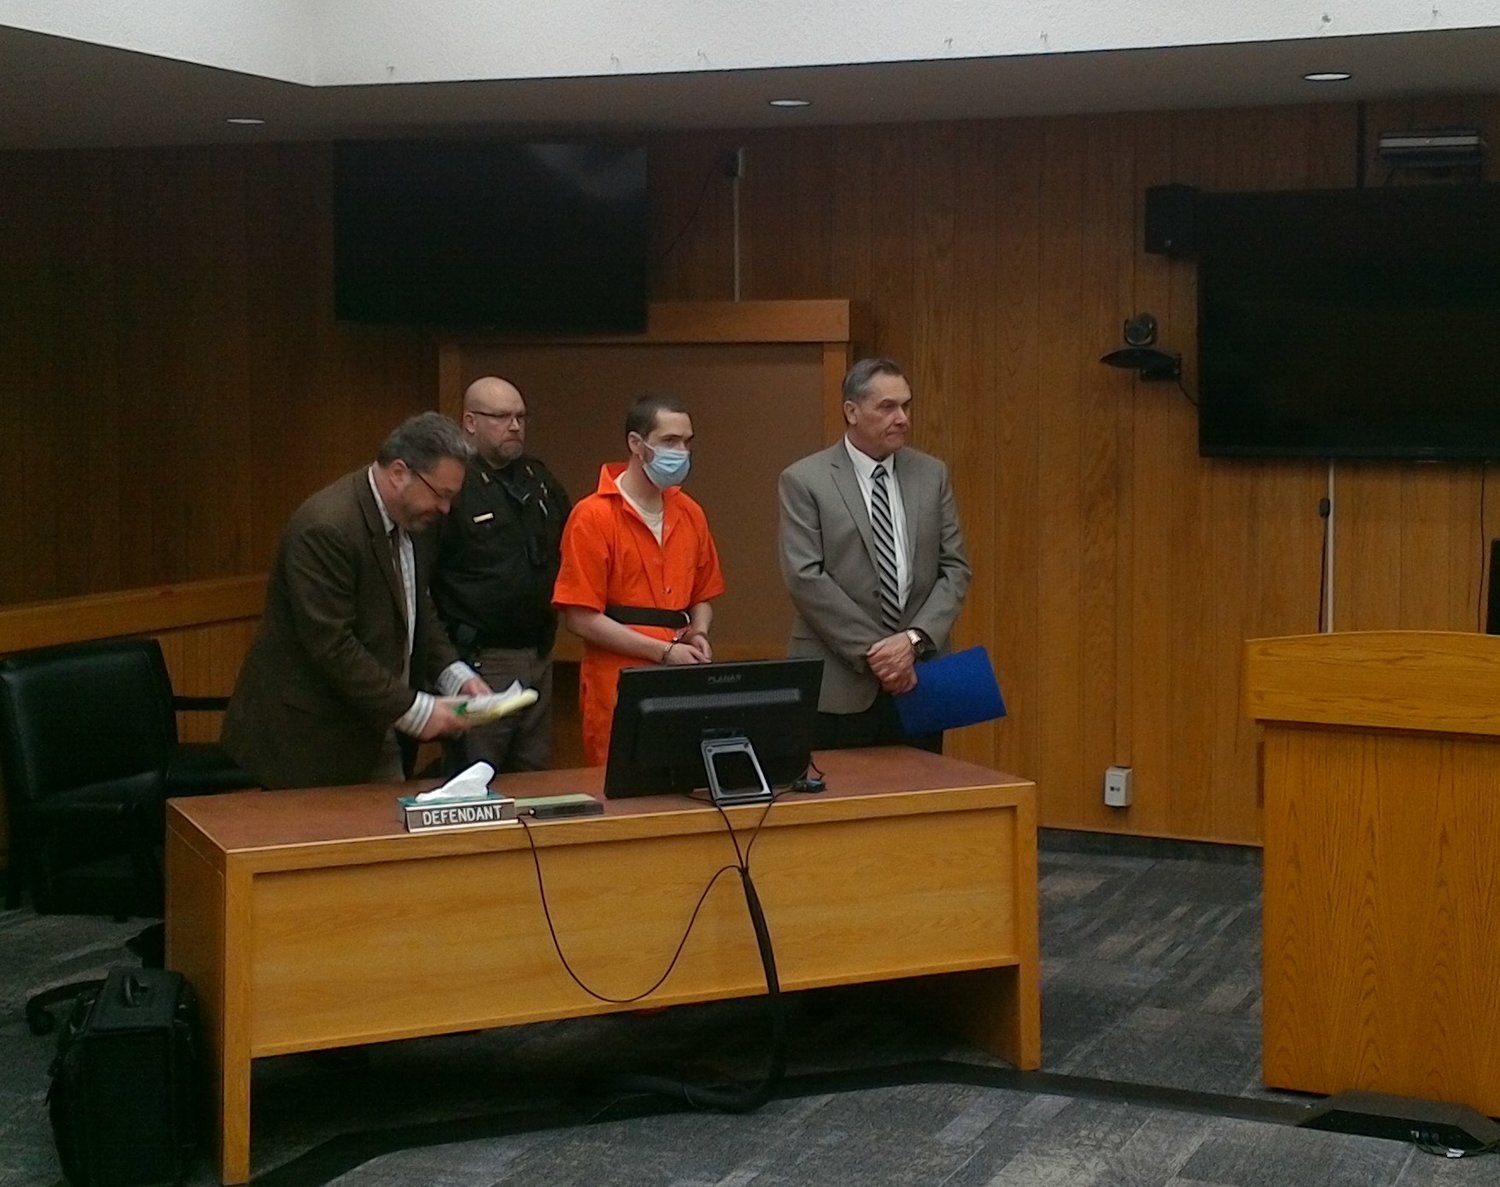 Joseph Sadlak flanked by his attorneys Conrad Vincent on the left and Daniel Pawlak far right, prepares to leave an Eaton County Circuit Courtroom where he entered a no contest plea to second degree murder in the 2018 killing of Clinton "Billy" Decker.